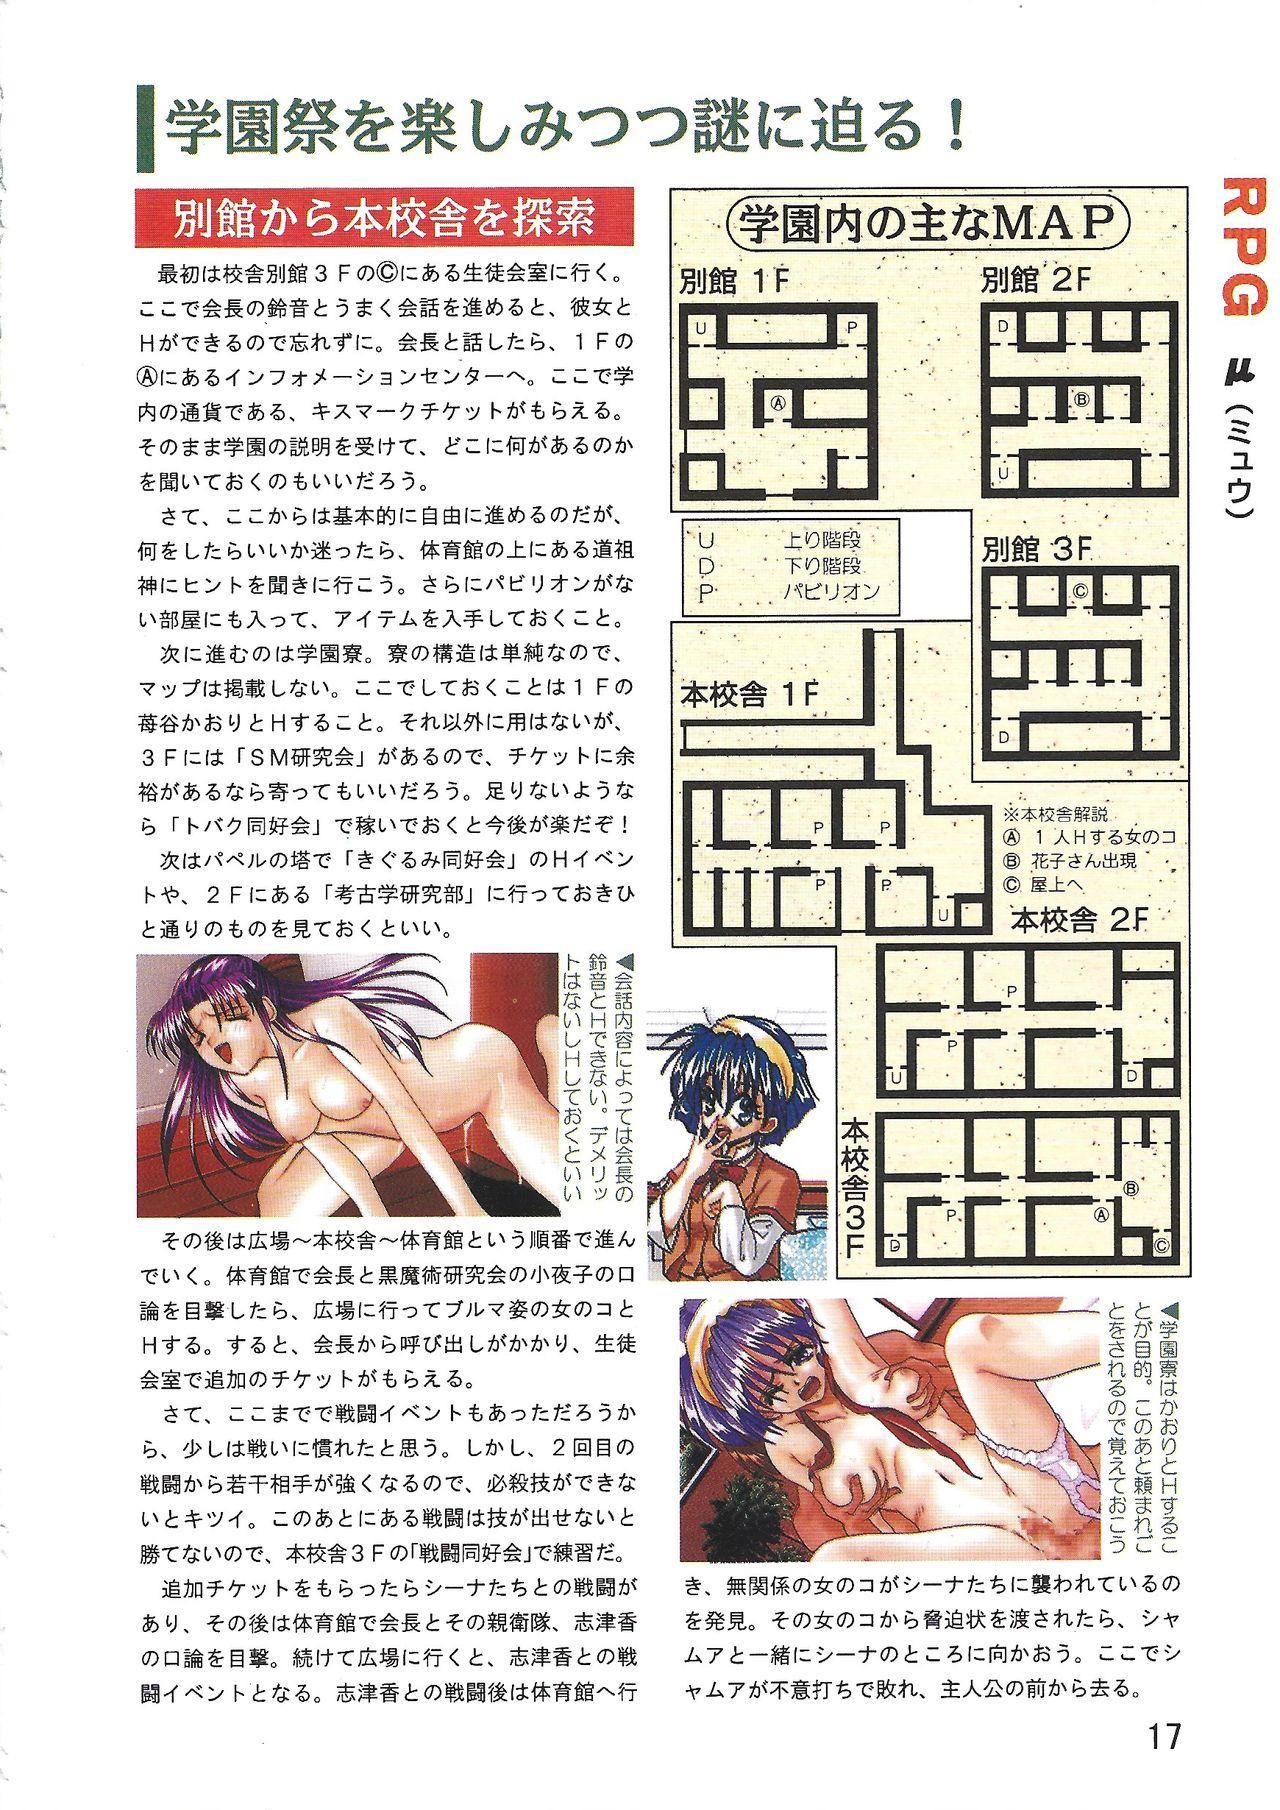 PC Bishoujo Software Strategy Book: Strategy King 2 16